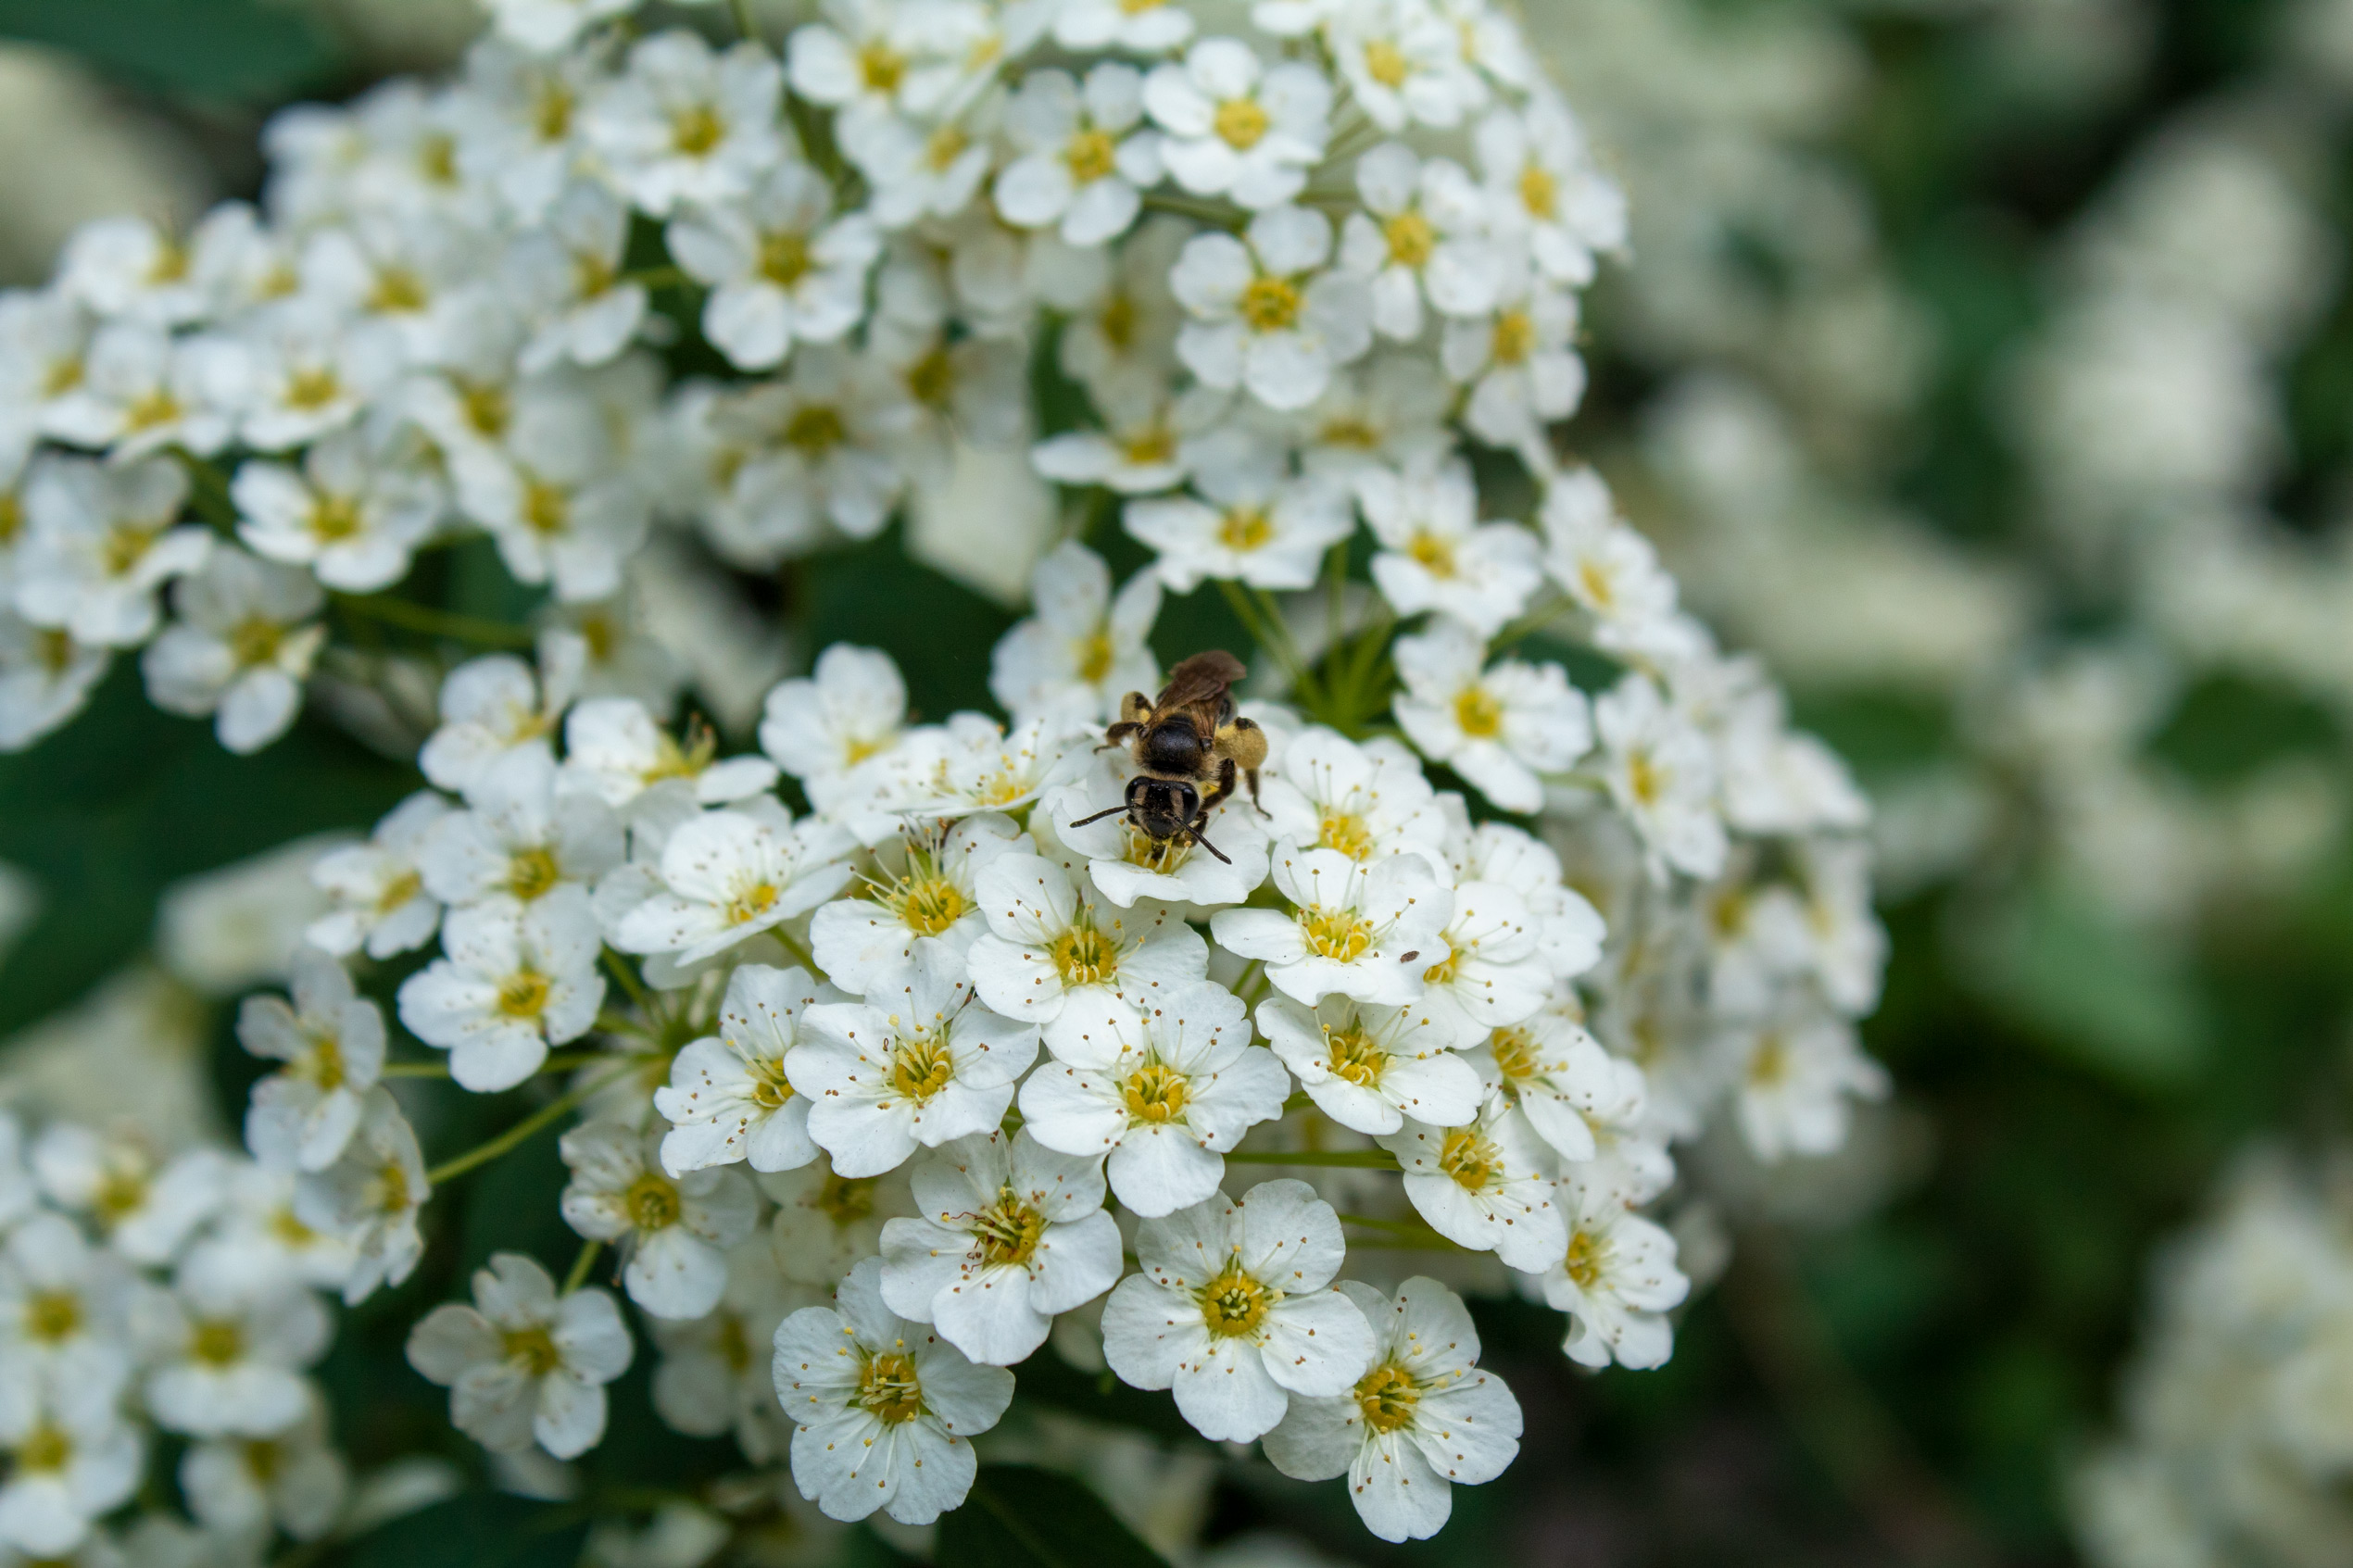 Bee sitting on a bundle of white flowers